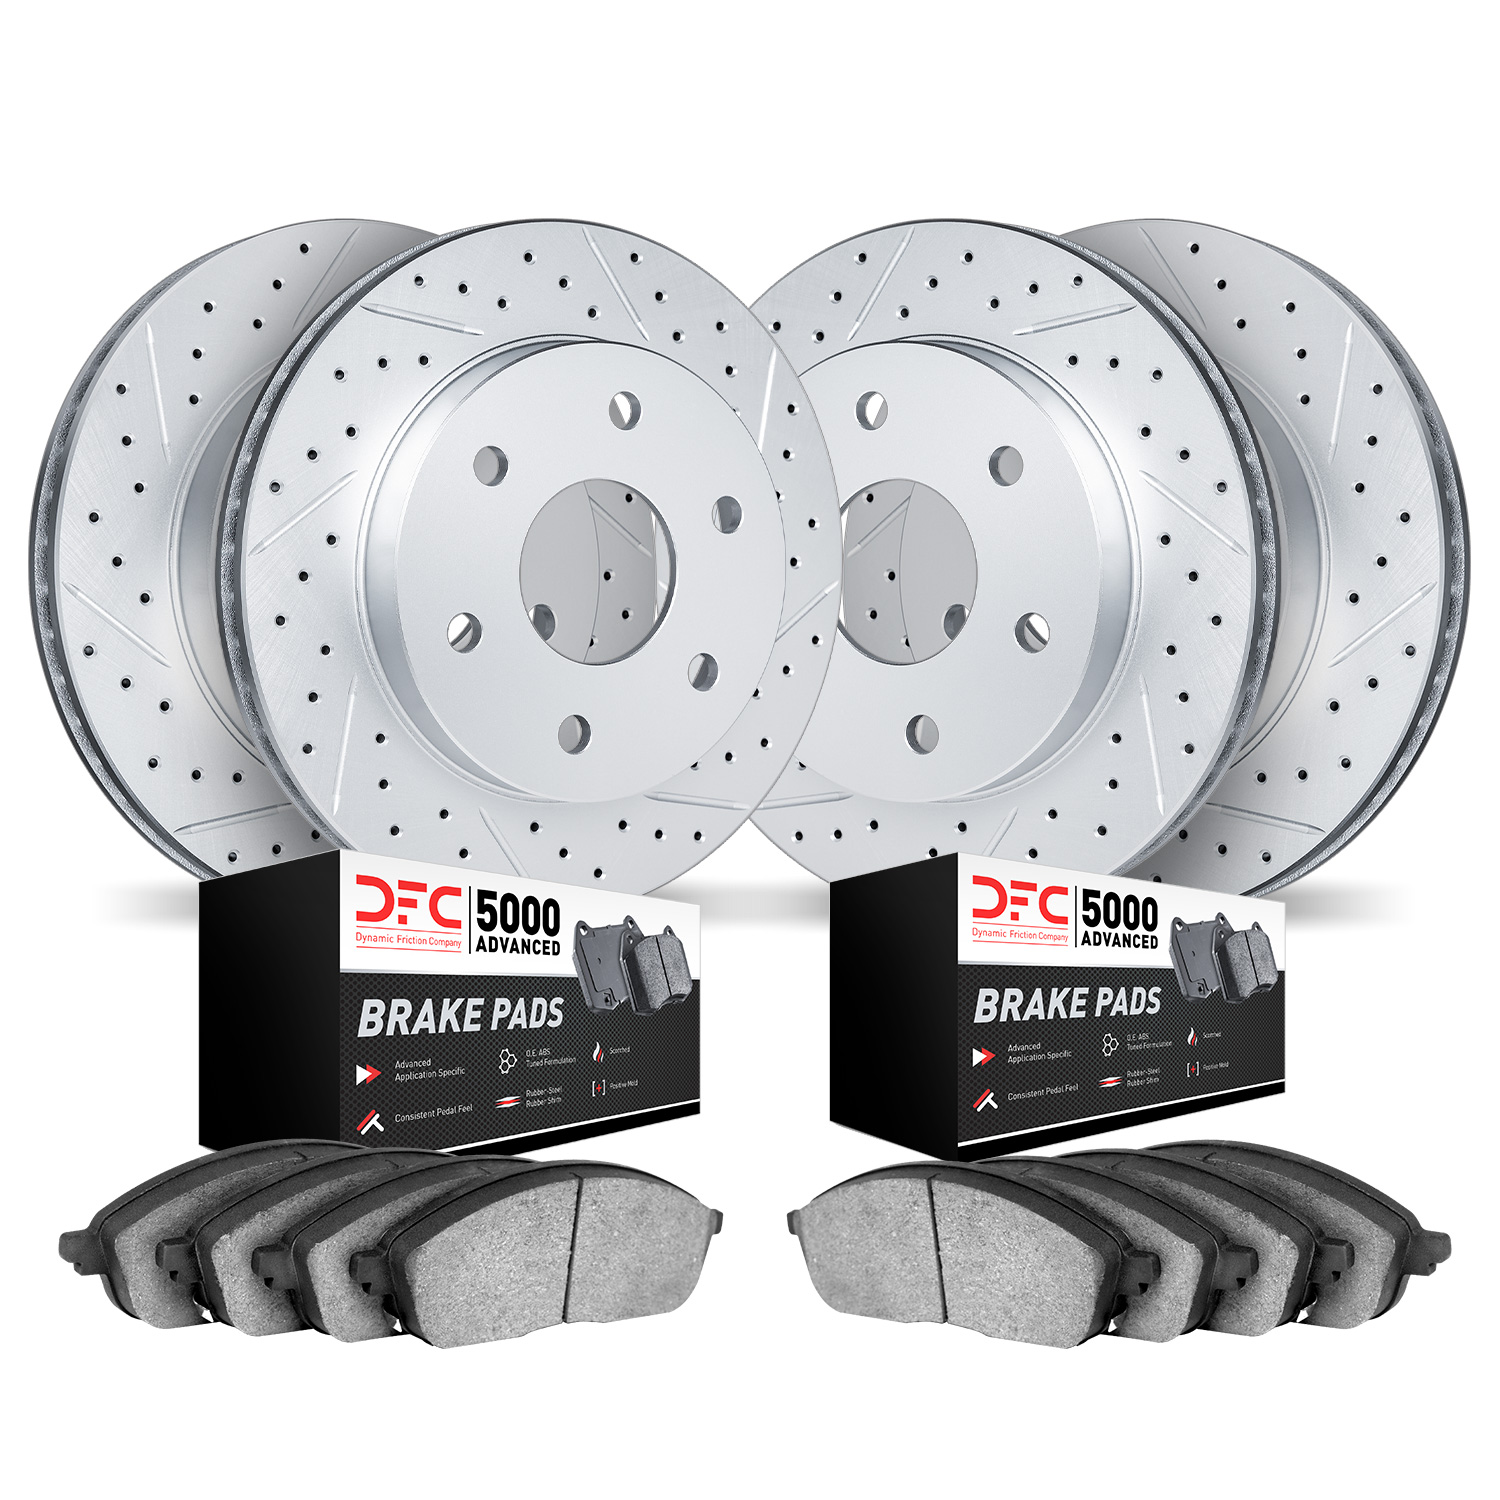 2504-48042 Geoperformance Drilled/Slotted Rotors w/5000 Advanced Brake Pads Kit, 2007-2017 GM, Position: Front and Rear